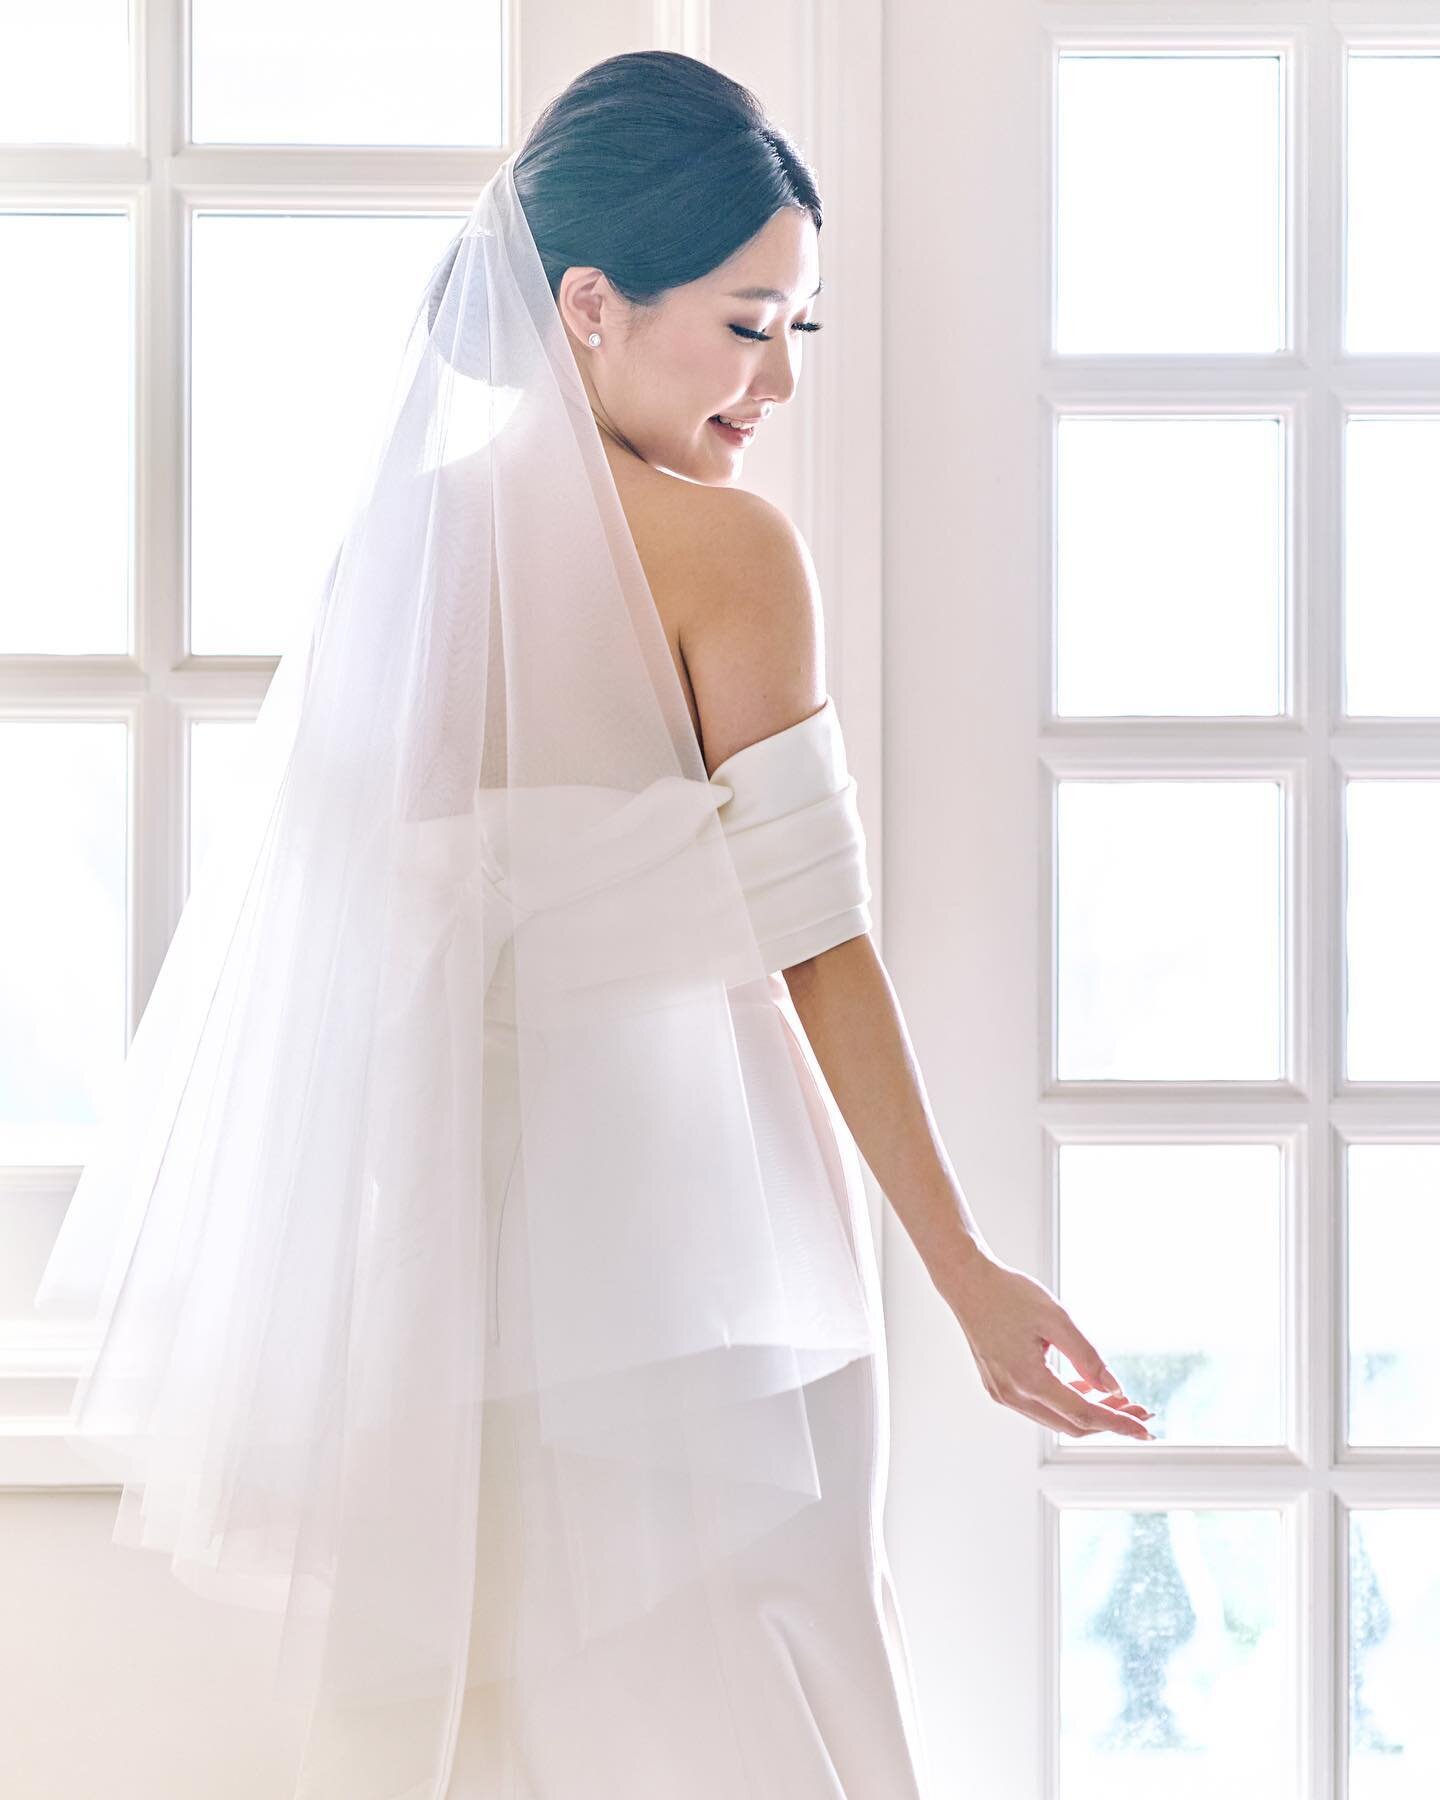 When blessed with a gorgeous bride and amazing light like this. We simply focus on the aesthetics. 
-
Photo @antelopestudios 
HMUA @lindalino.makeup 
Video @substancefilms 
Dress @theivorybridal 
Venue @raffleshotelsingapore